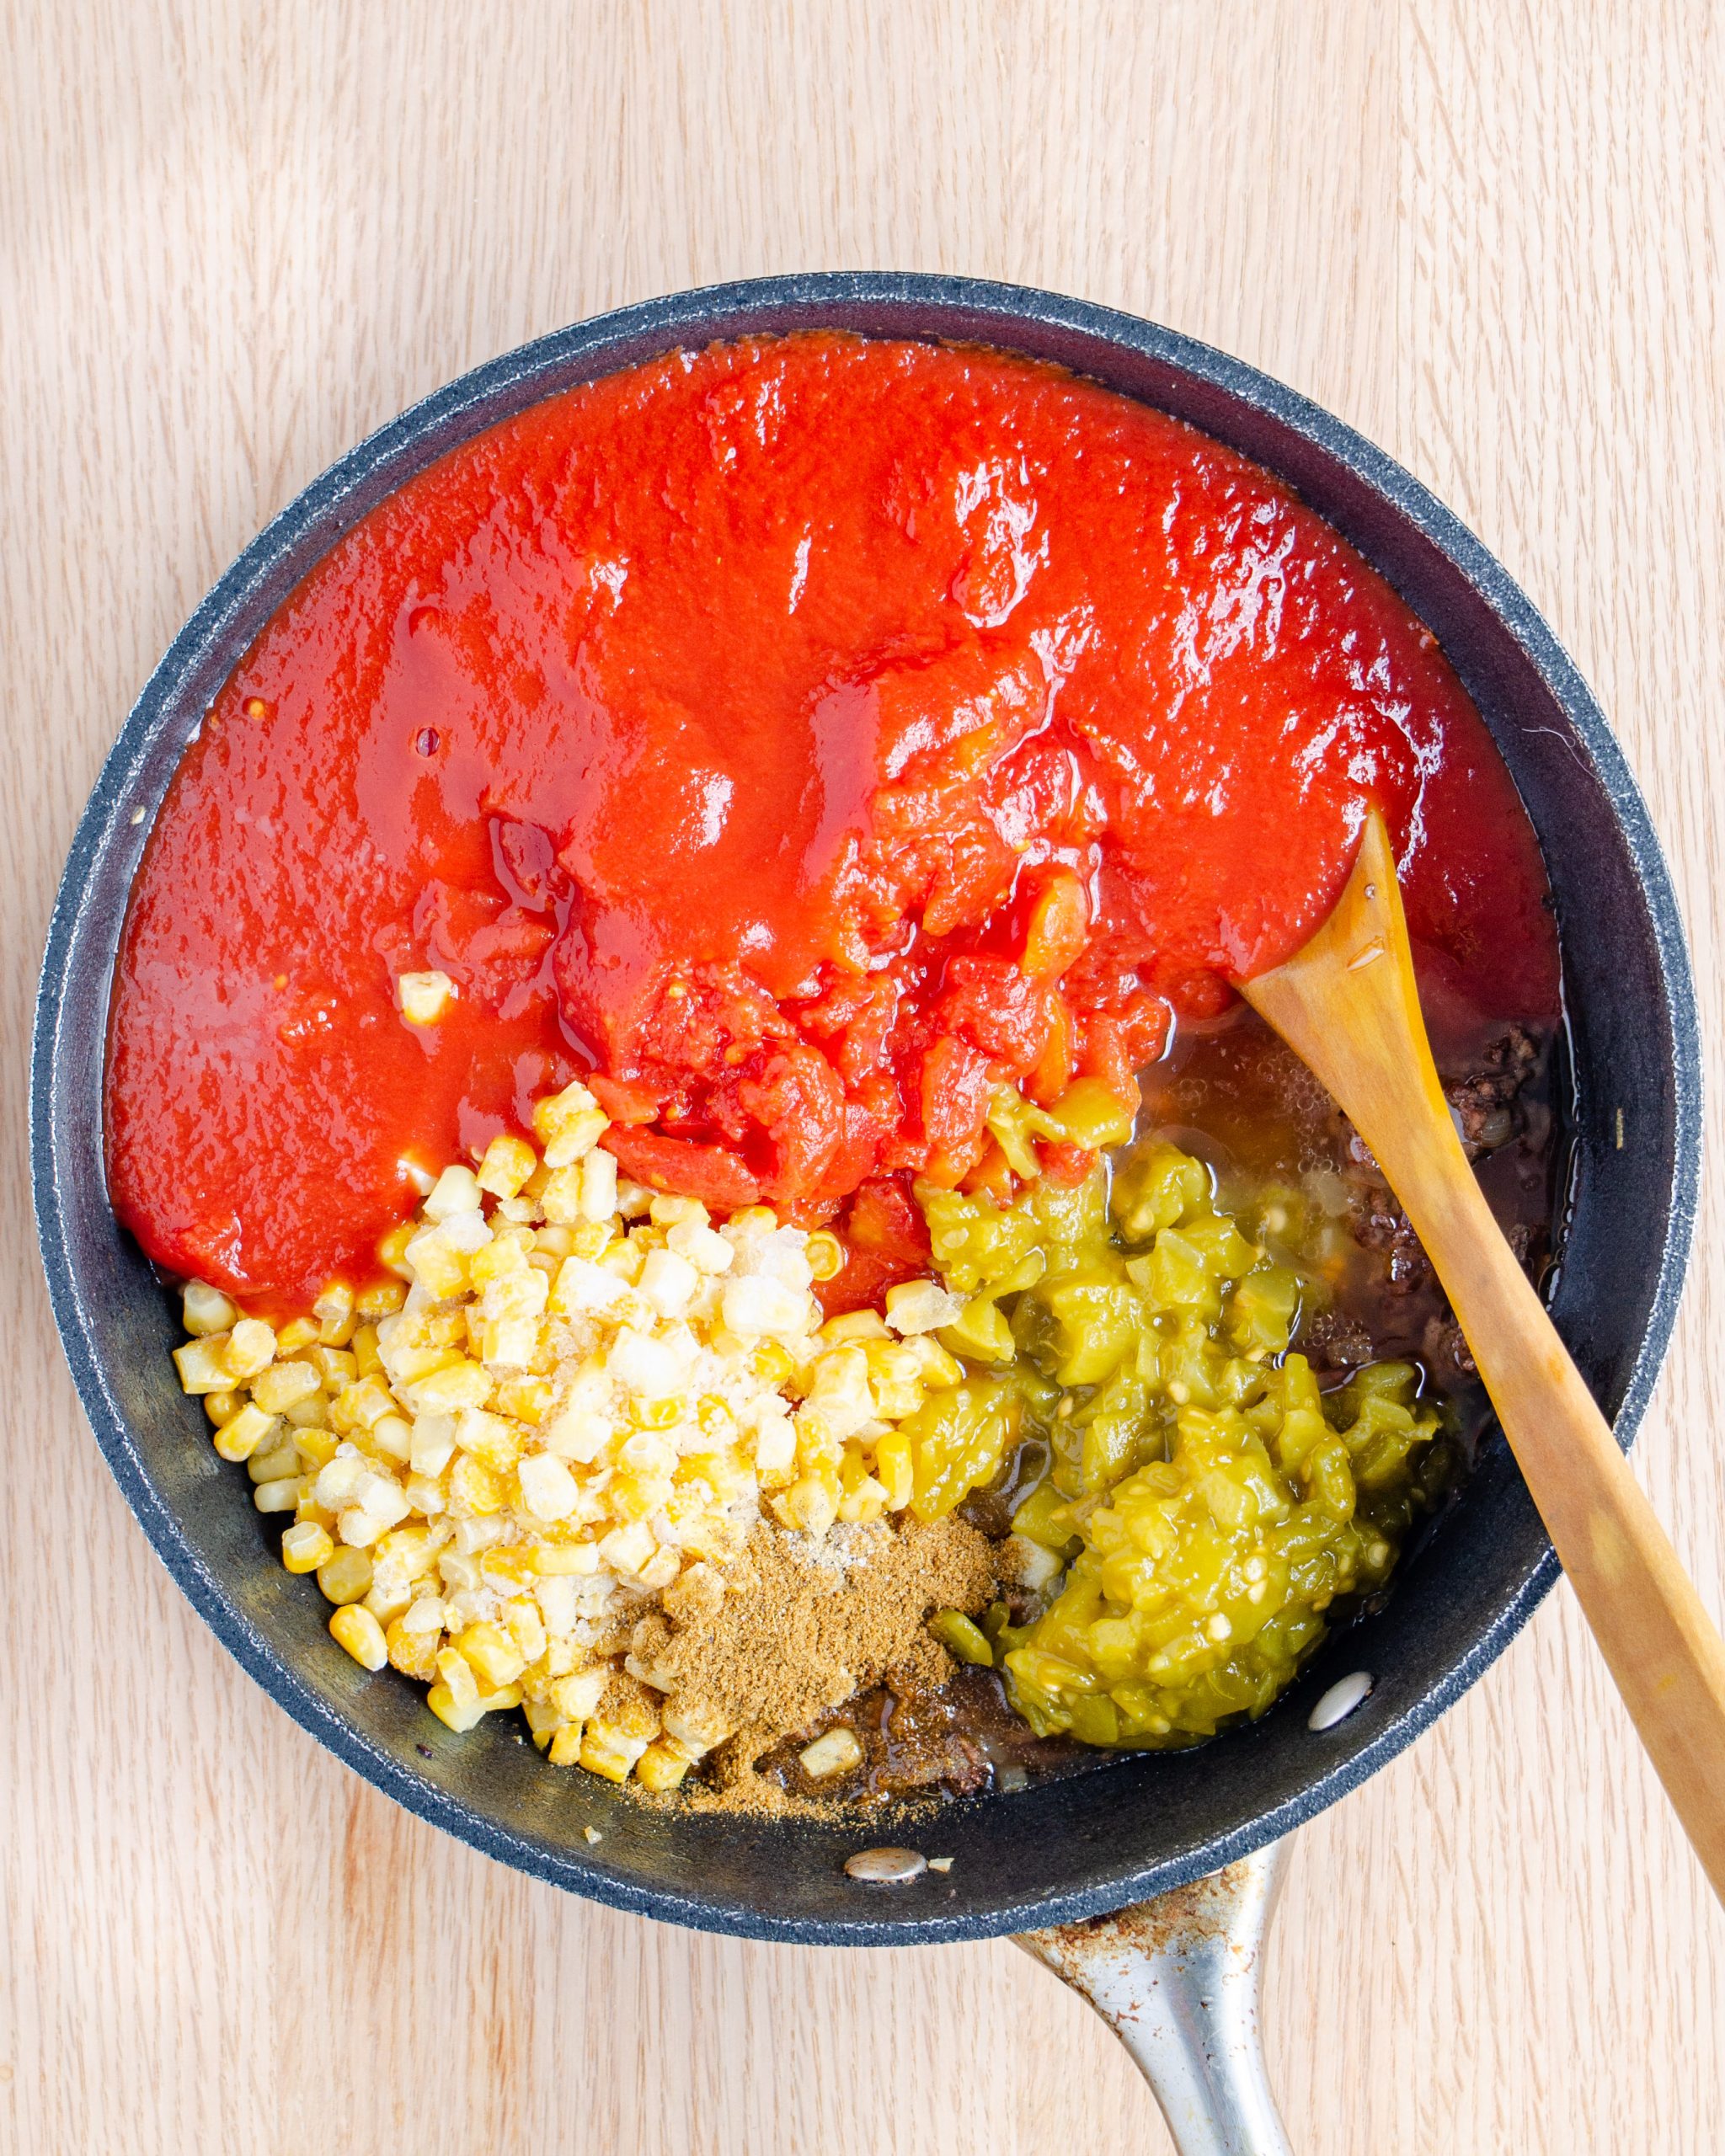 Reduce the heat to medium and add in the diced tomatoes, frozen corn, tomato sauce, green chilis, salt and pepper, and cumin. Stir to combine.